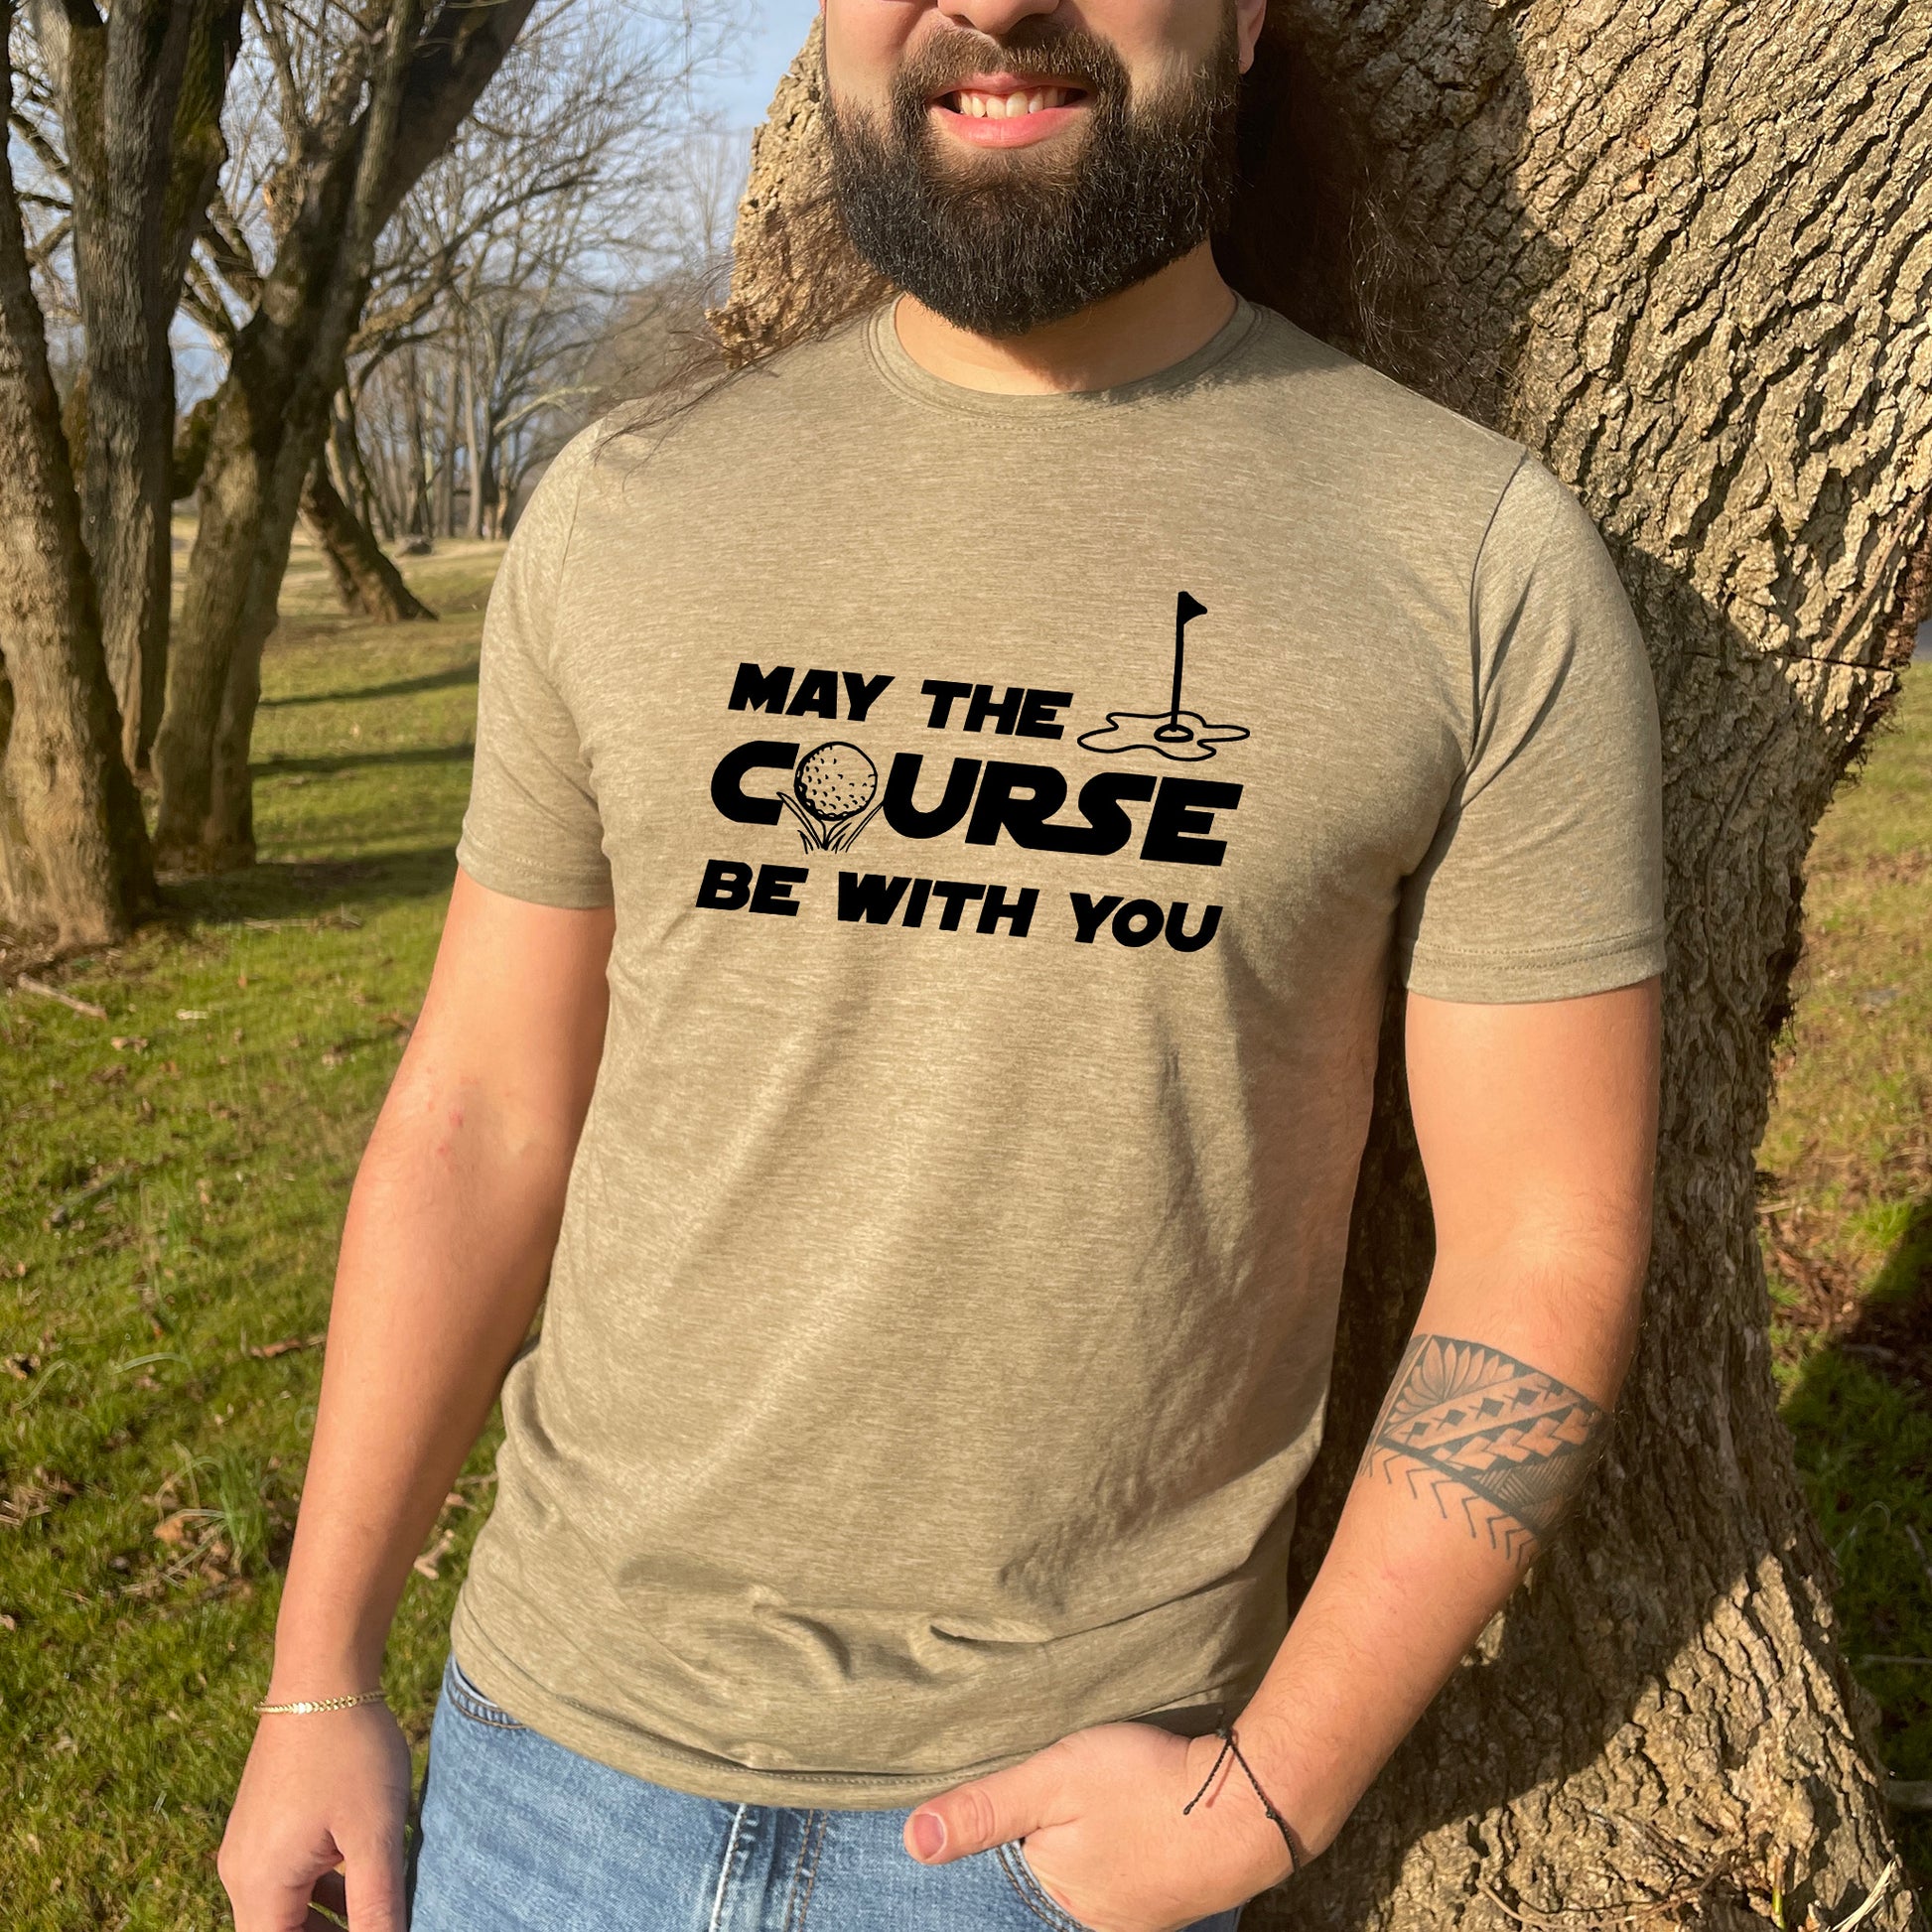 a man wearing a t - shirt that says may the course be with you